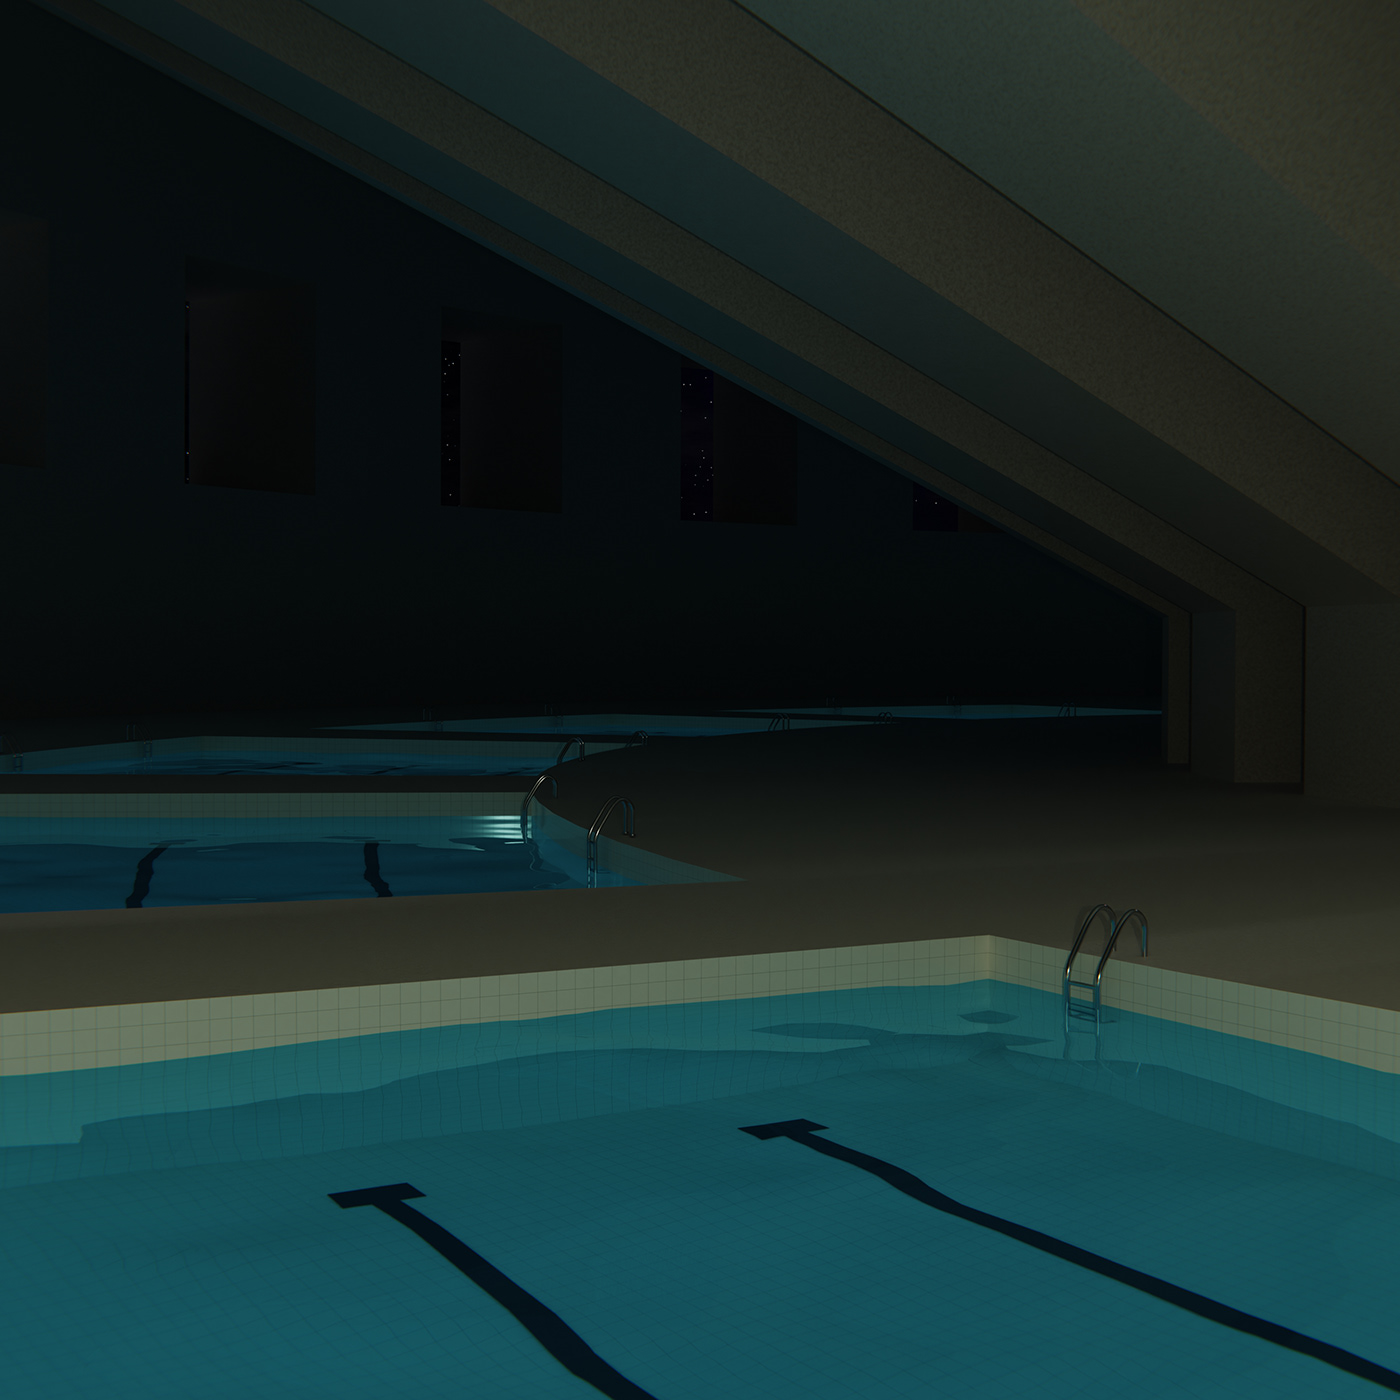 liminal swimming pool dreamcore liminal spaces dreampool poolcore Poolrooms poolside liminal space backrooms